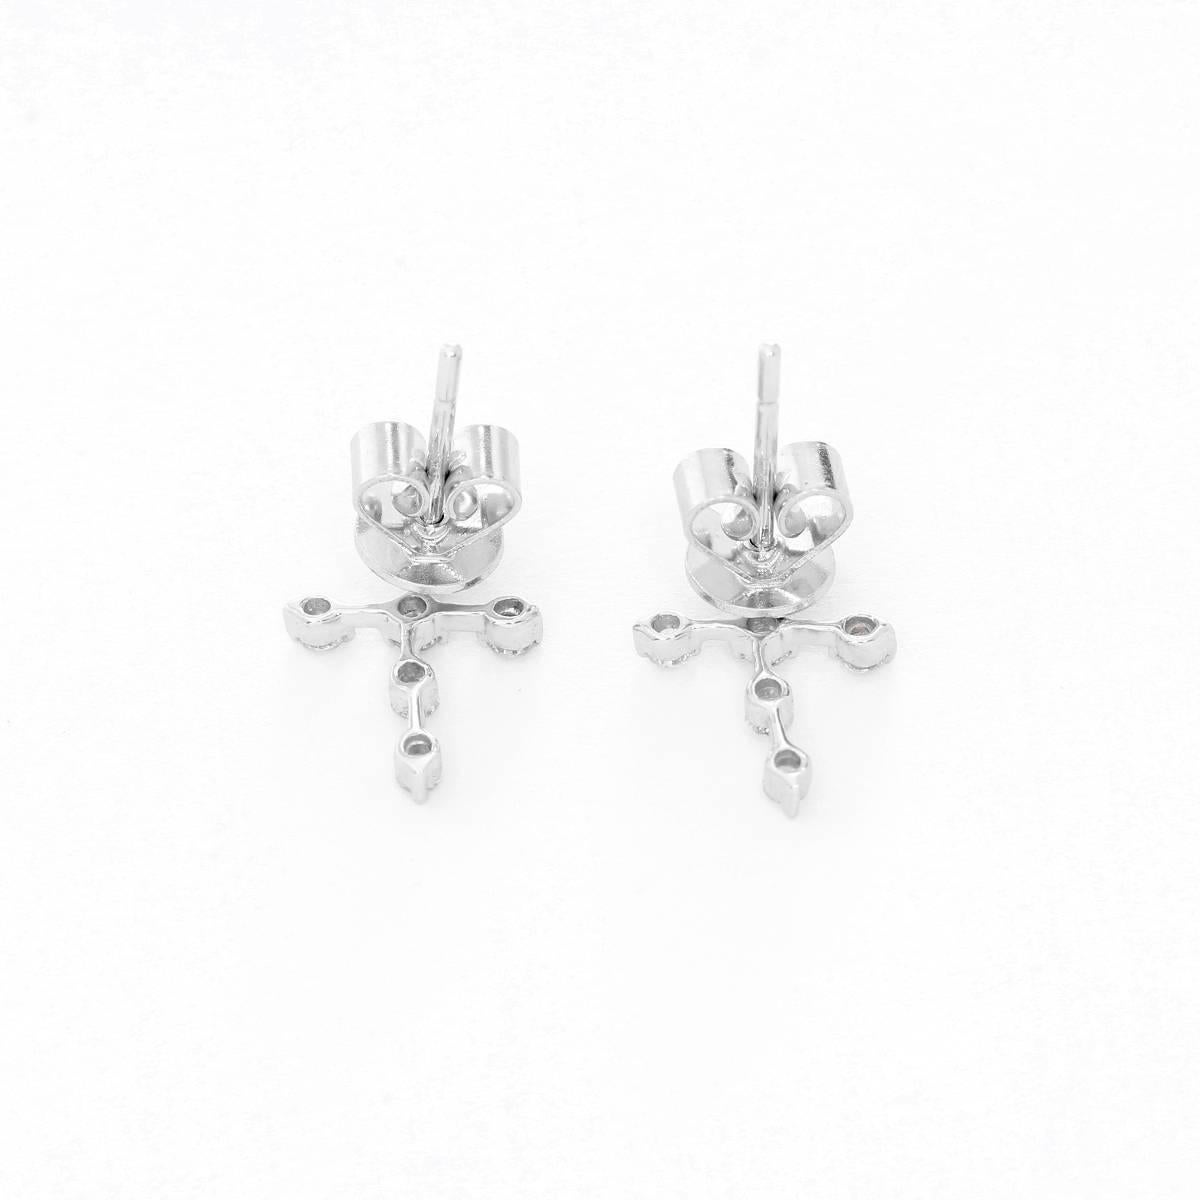 14K White Gold Diamond Cross Earrings - . Dainty white gold earrings with six diamonds equaling .26 carats. Total weight 1.36 grams.  Perfect diamond earrings for every day use!.